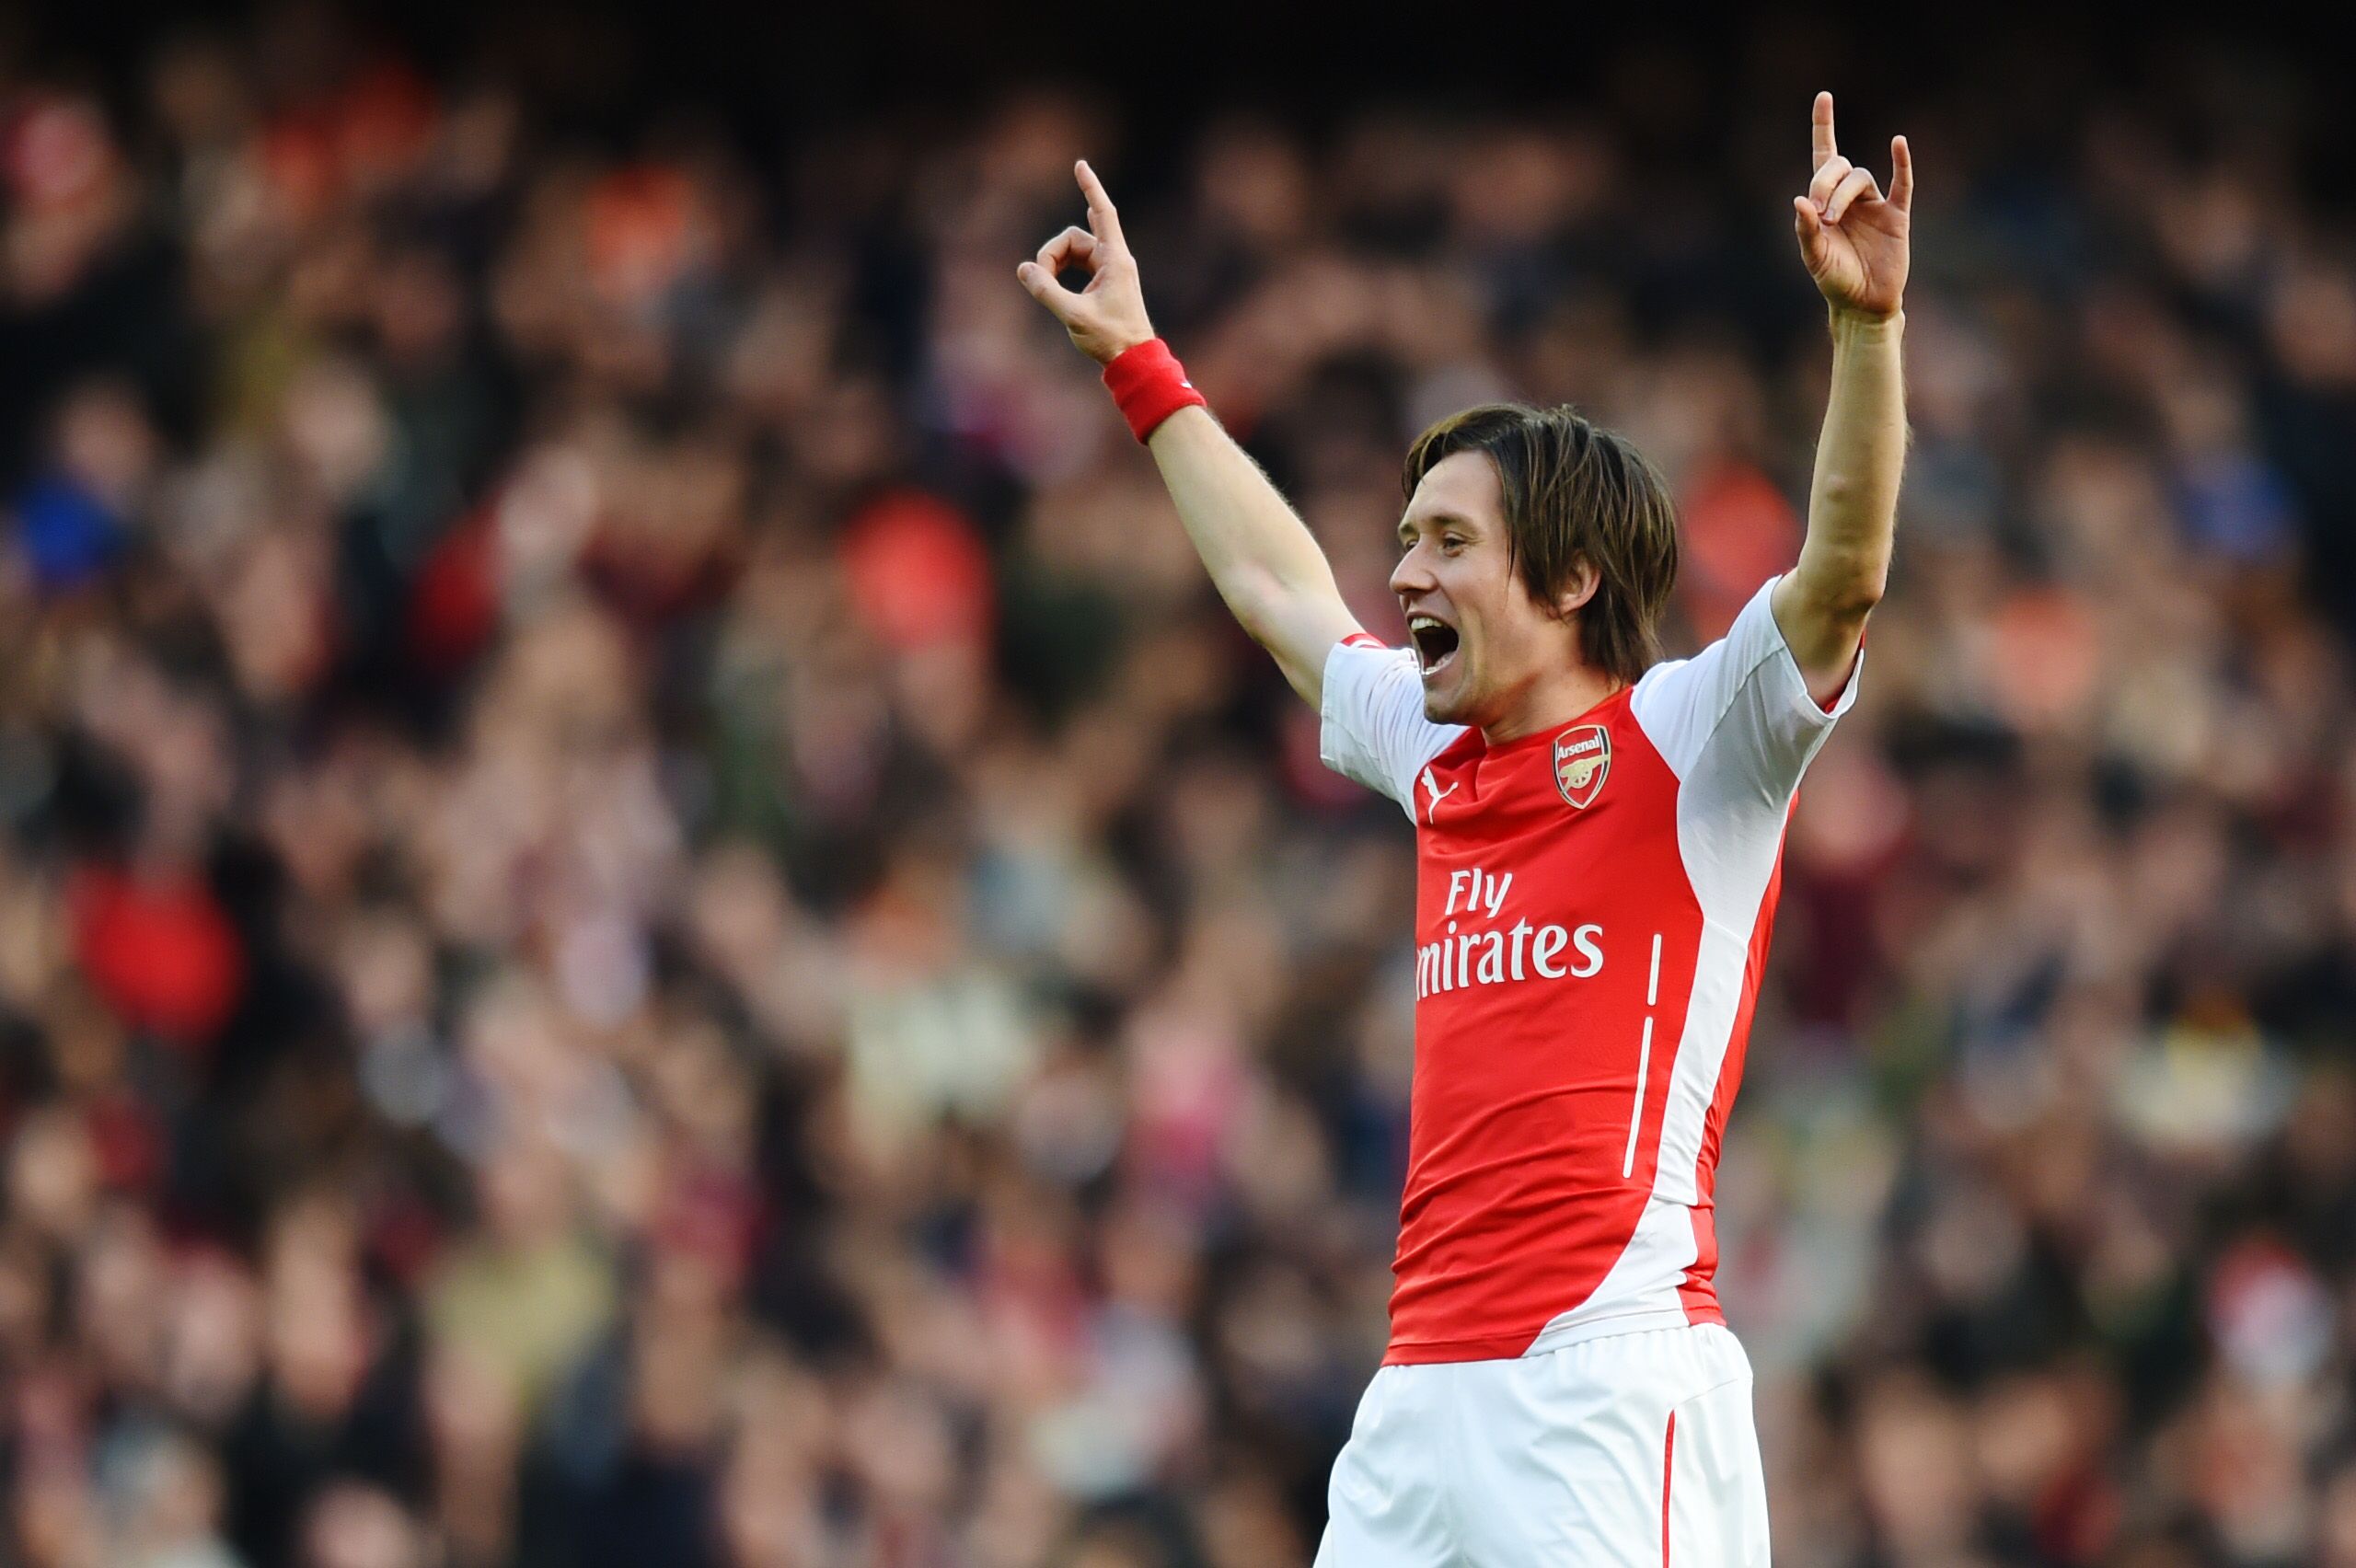 Football - Arsenal v Everton - Barclays Premier League - Emirates Stadium - 1/3/15 
Arsenal's Tomas Rosicky celebrates scoring their second goal  
Action Images via Reuters / Tony O'Brien 
Livepic 
EDITORIAL USE ONLY. No use with unauthorized audio, video, data, fixture lists, club/league logos or 